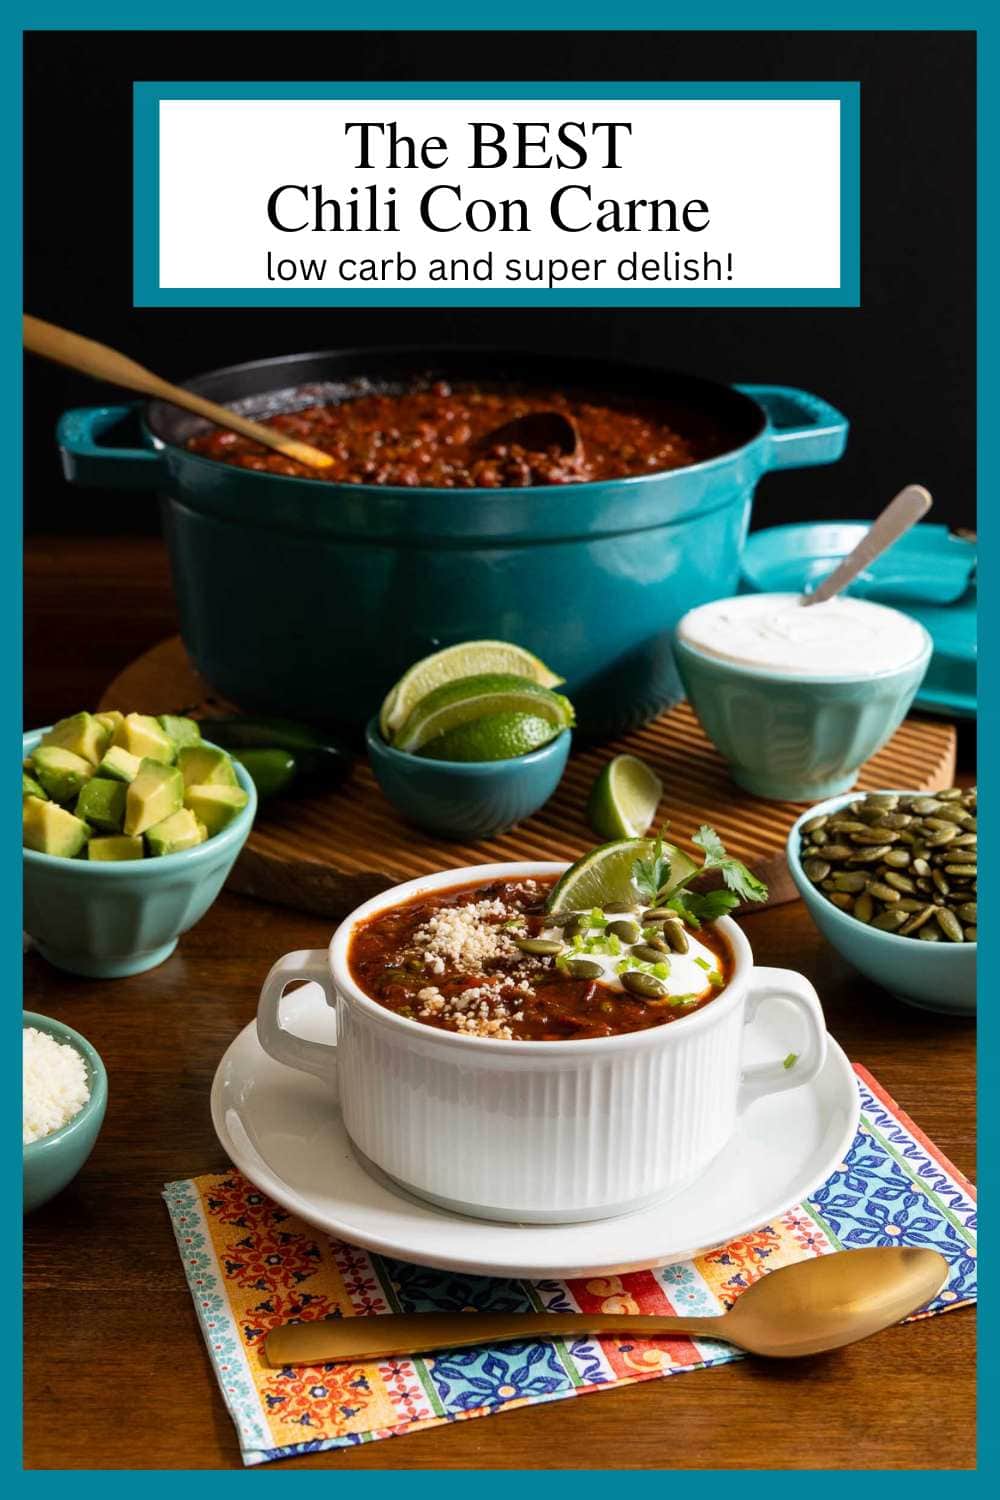 The BEST Chili Con Carne (Low-Carb and Super Delish!)